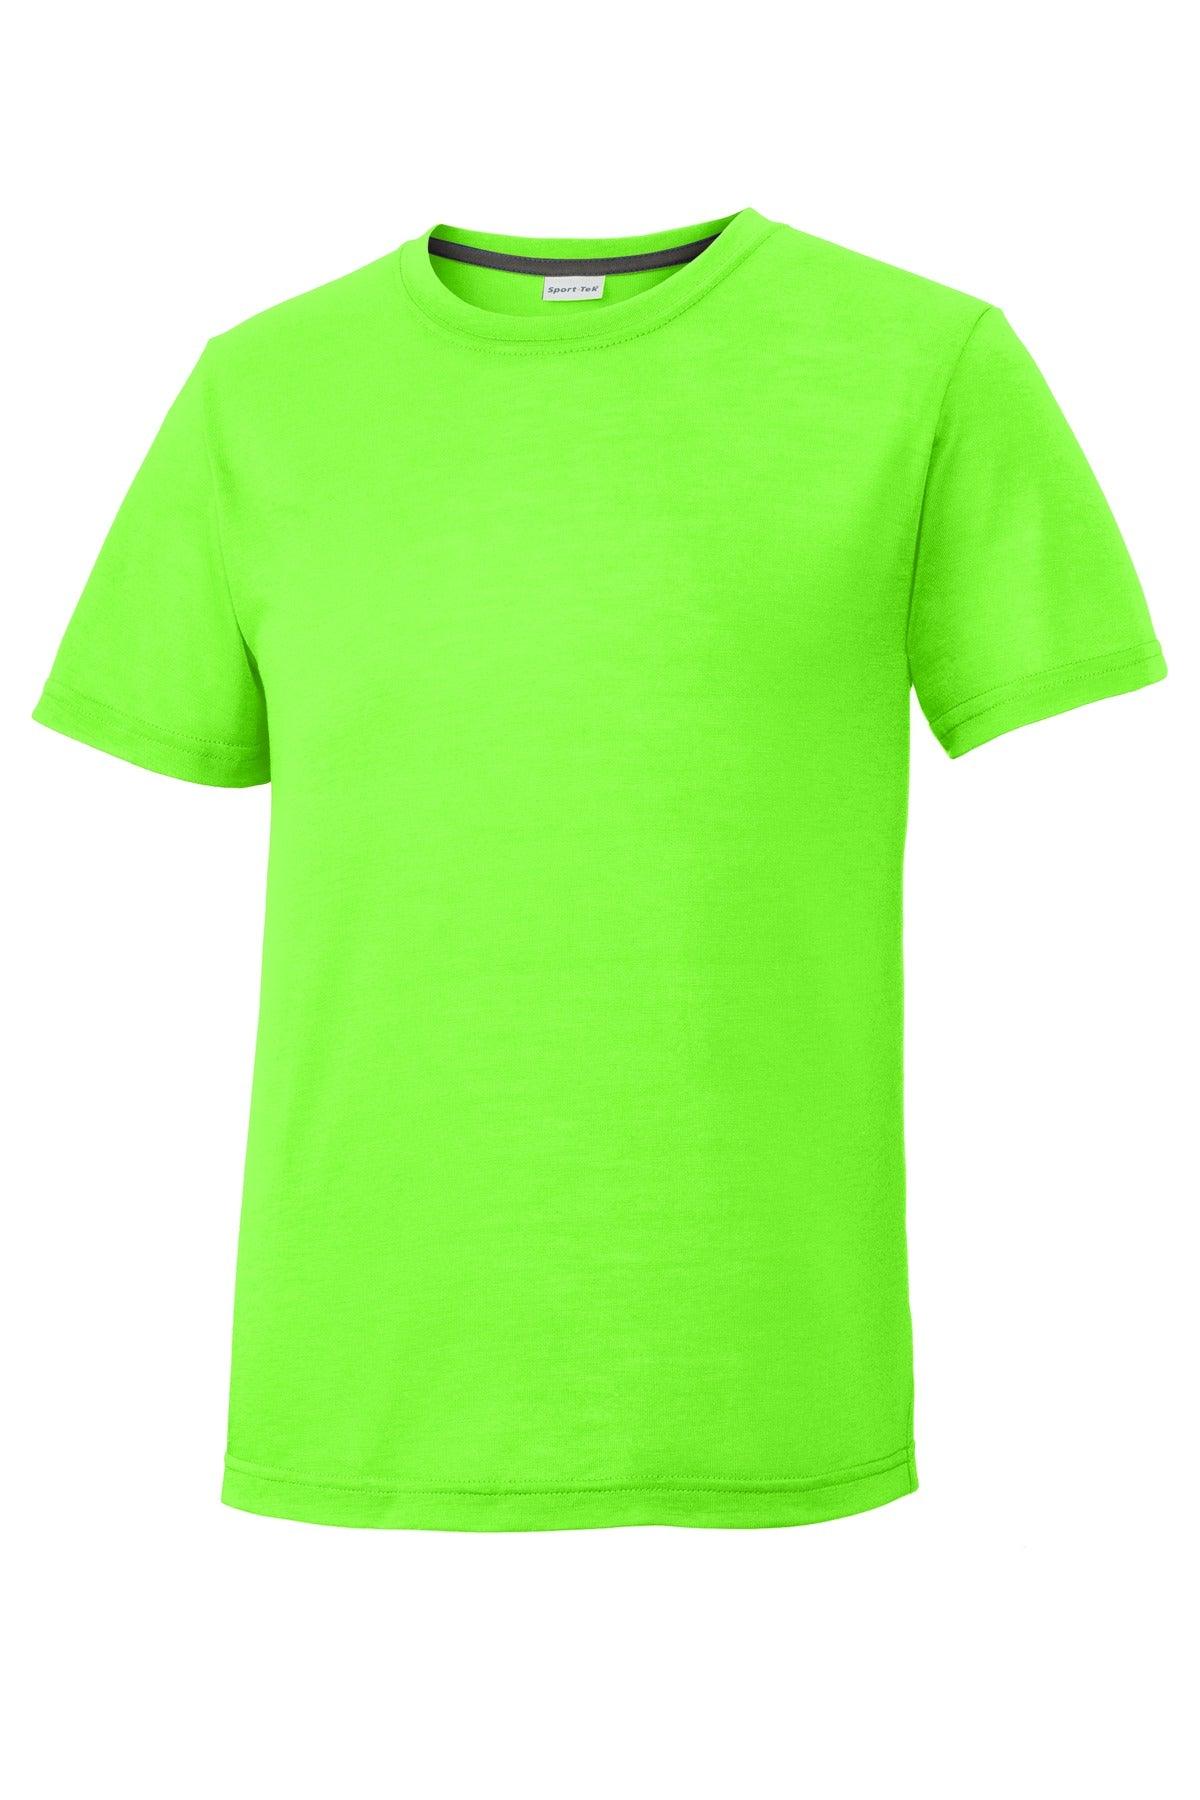 Sport-Tek Youth PosiCharge Competitor Cotton Touch Tee. YST450 - Dresses Max